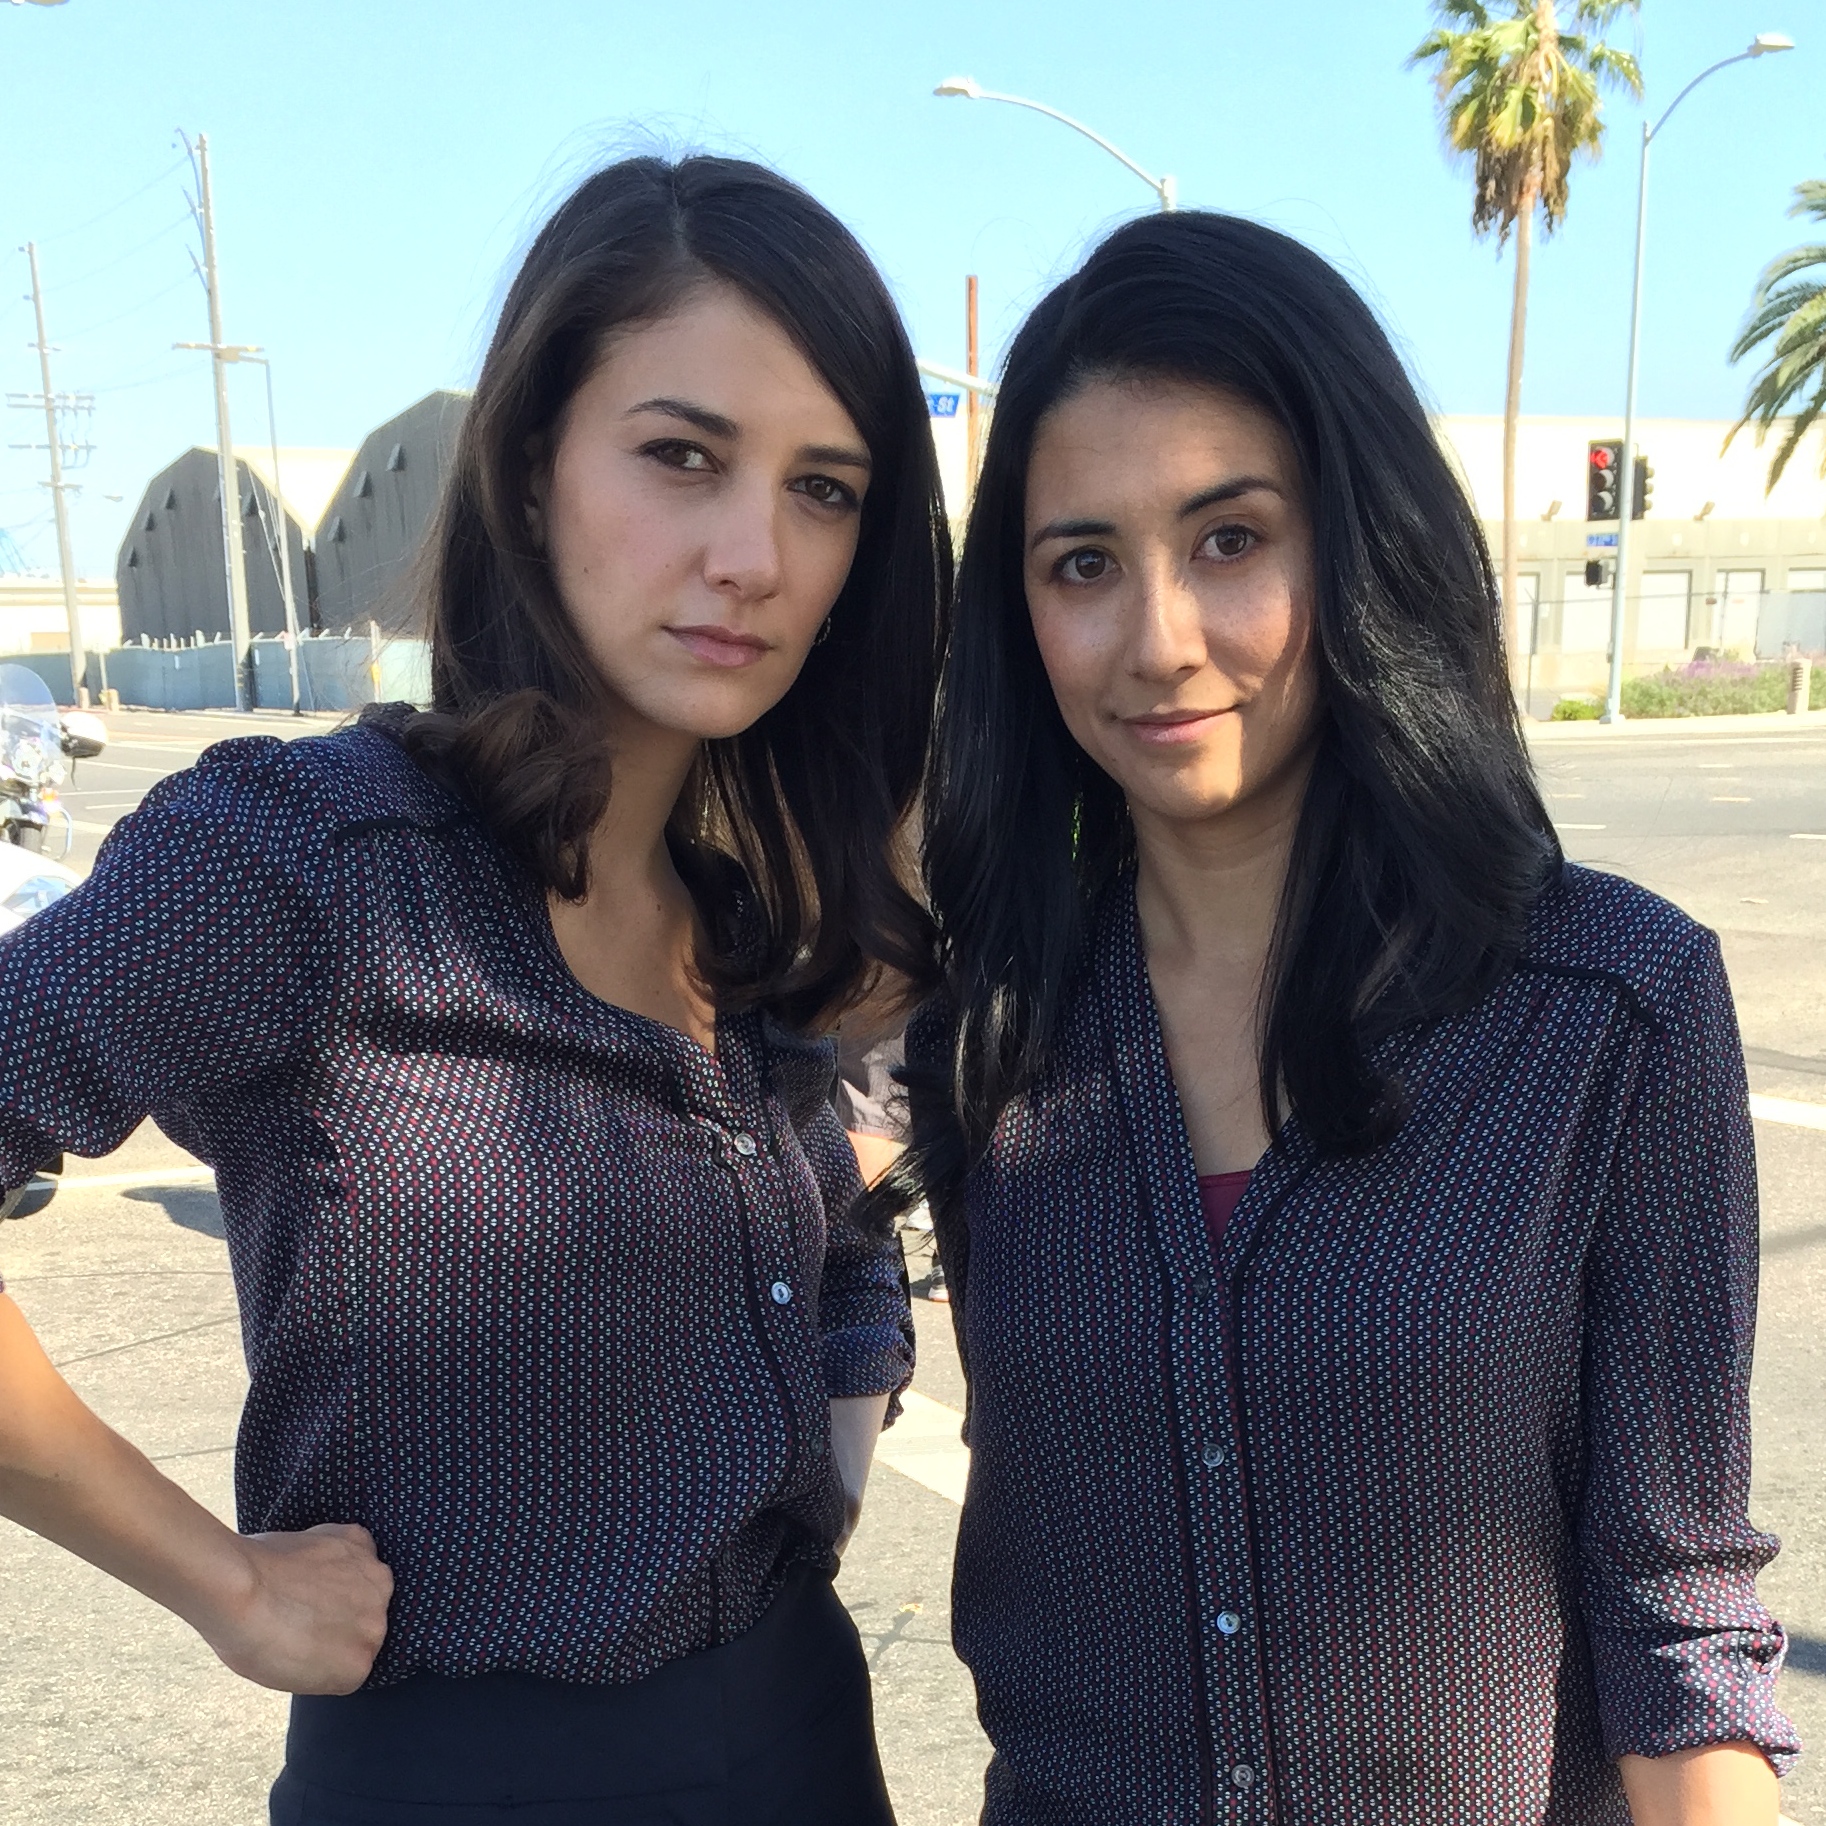 Stunt doubling the lovely Sheila Vand on State of Affairs.